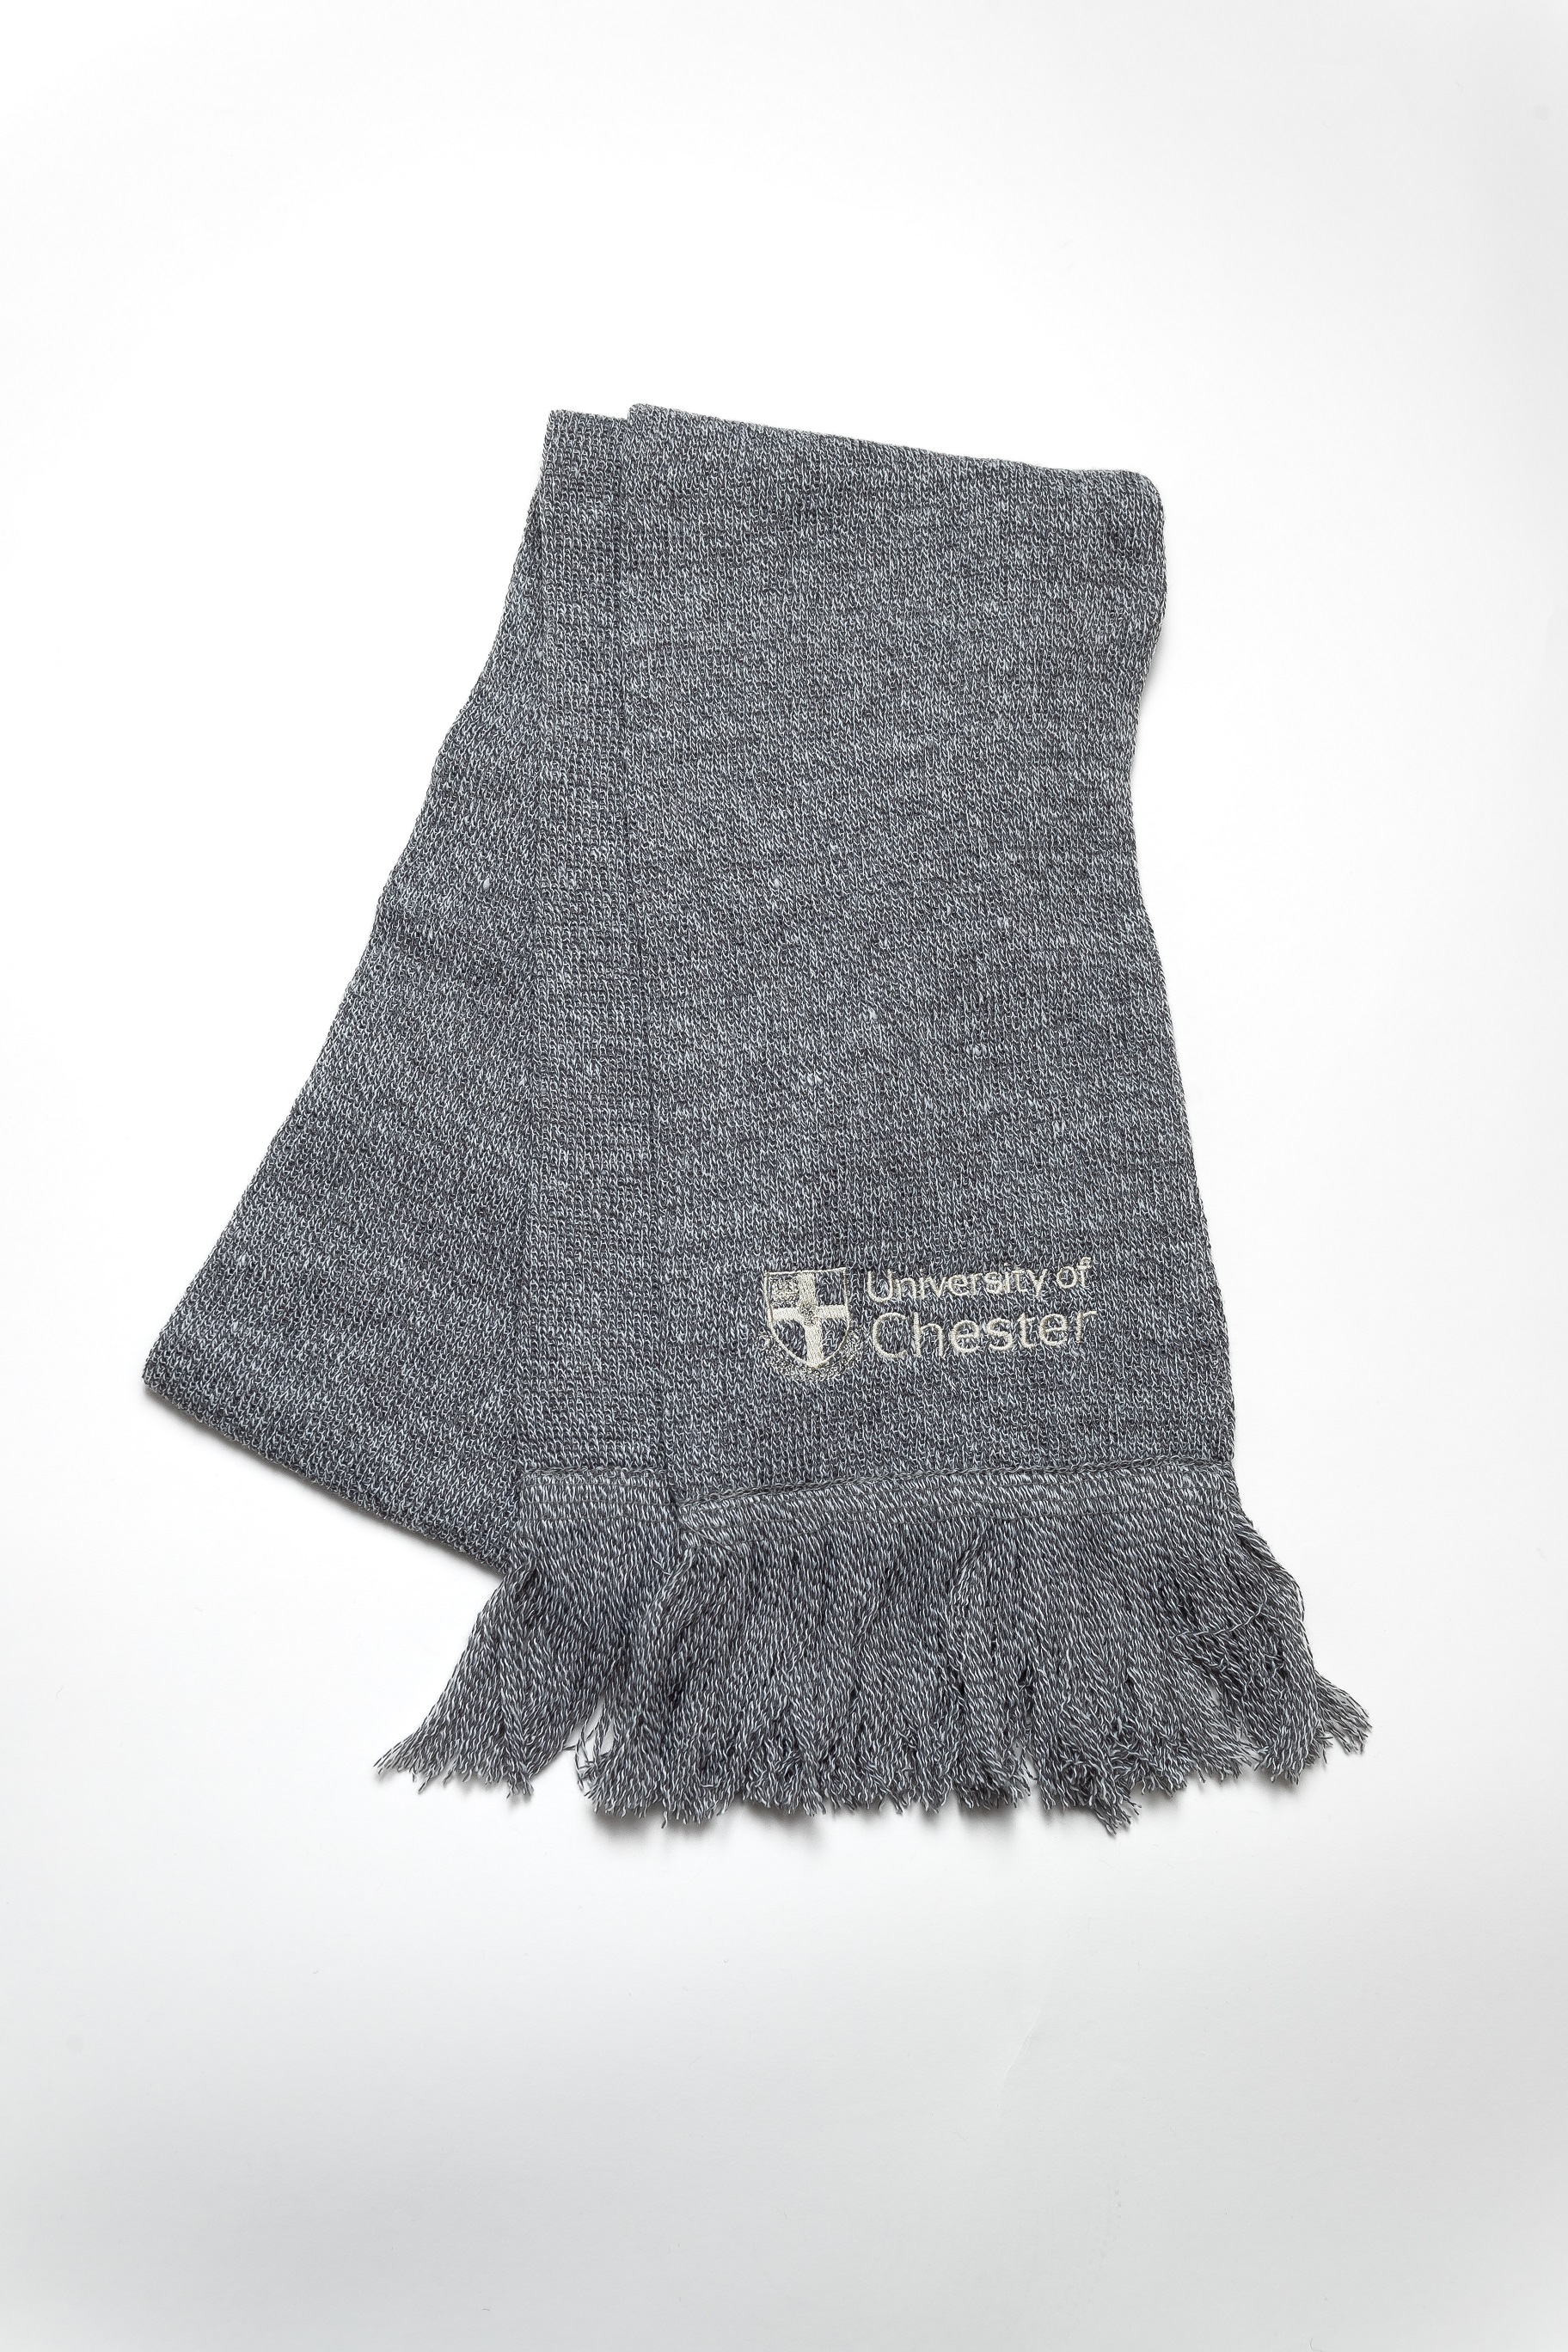 University of Chester scarf